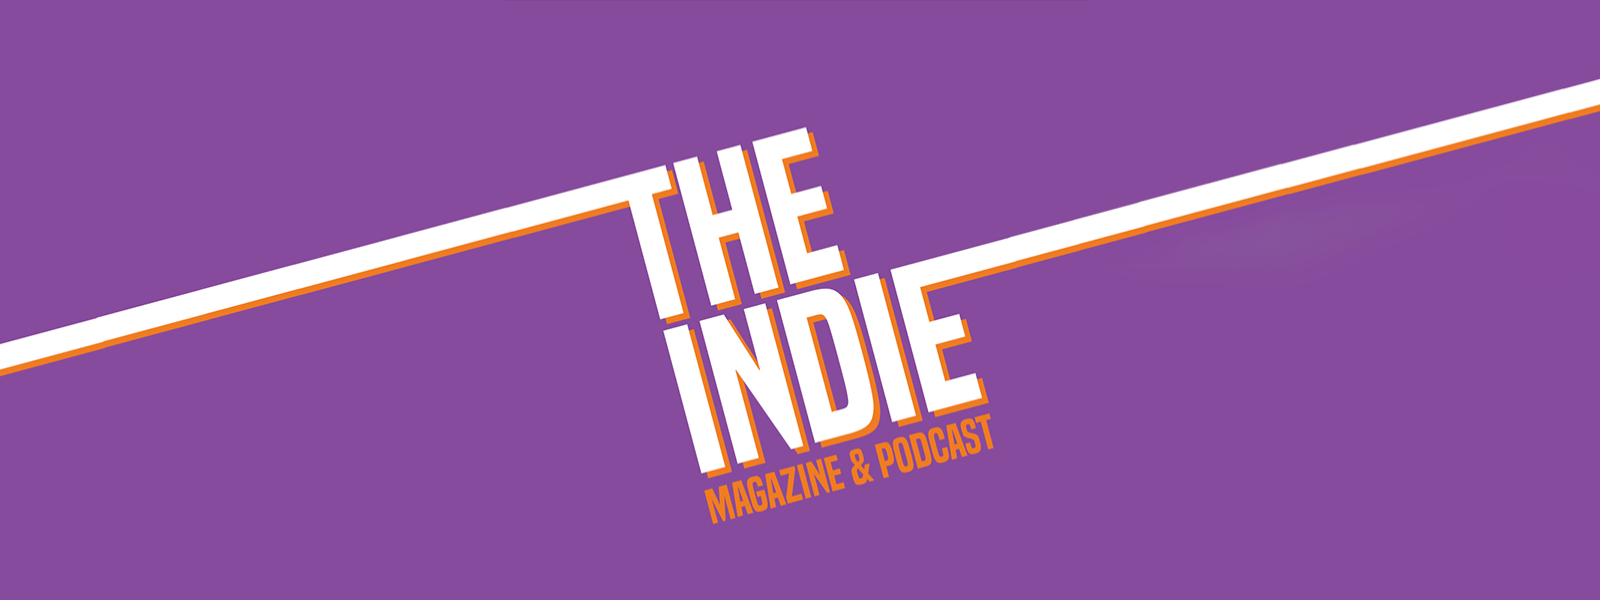 The Indie Magazine & Podcast